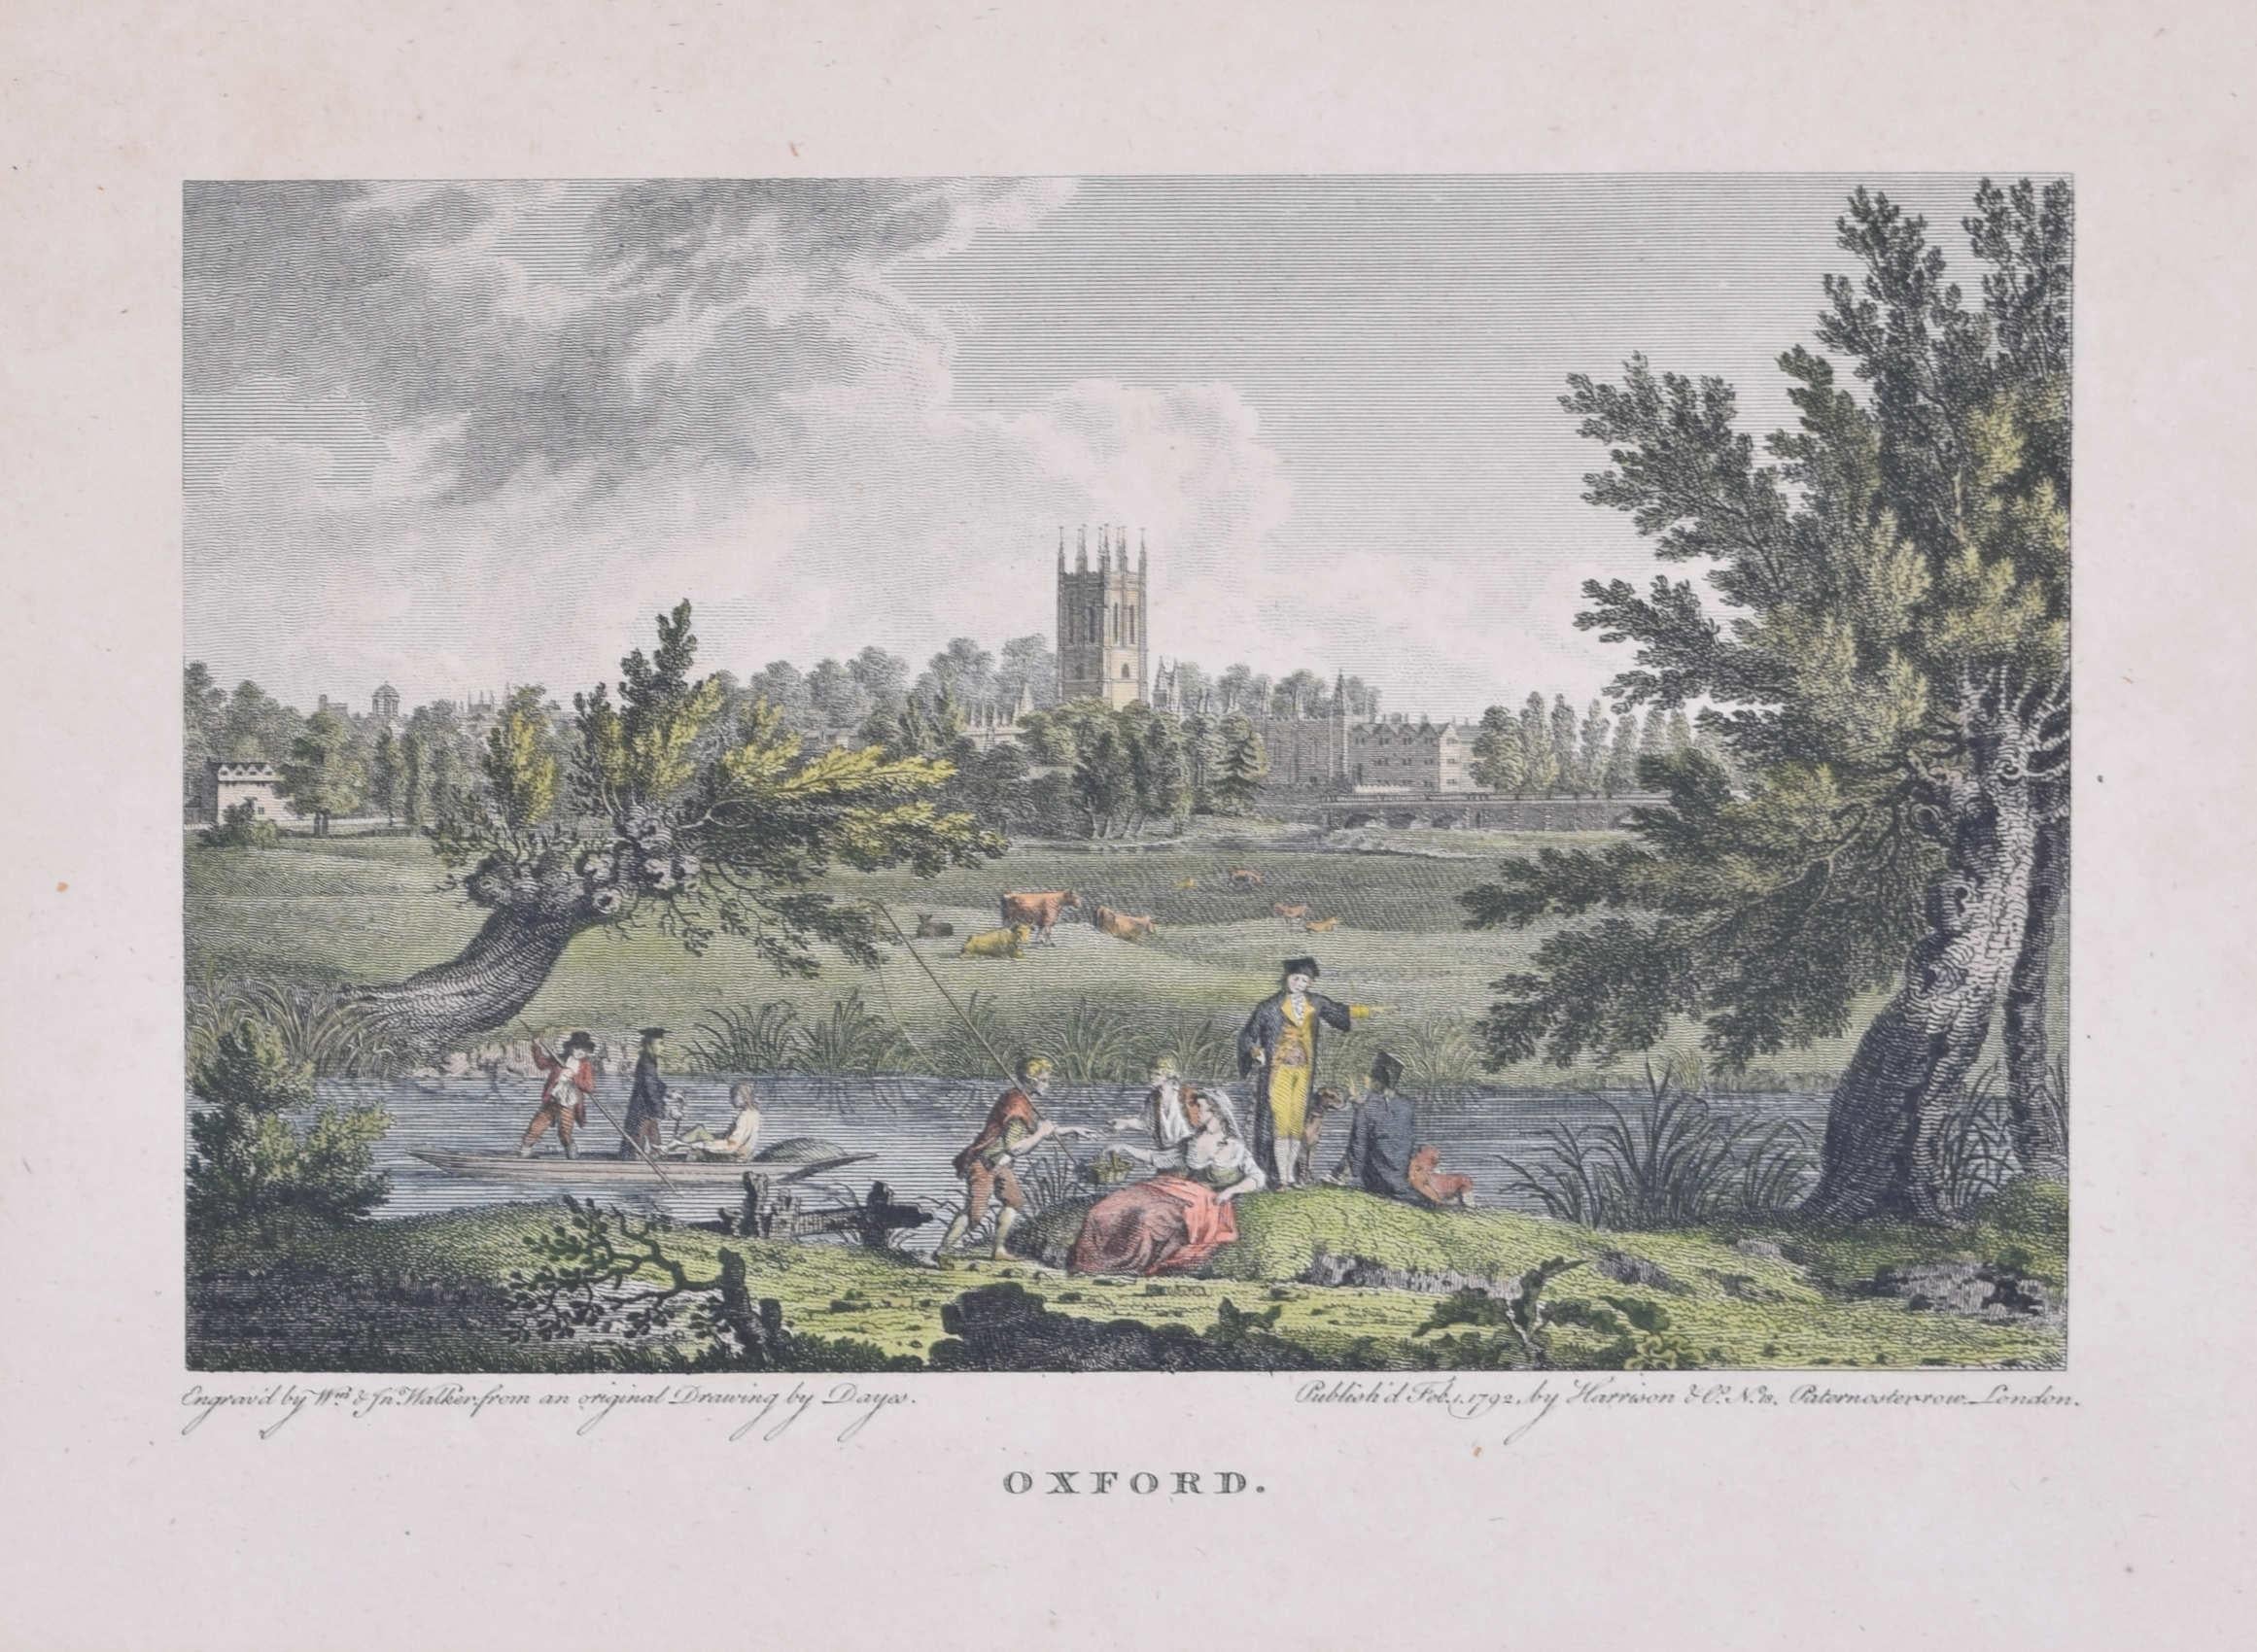 Oxford 18th century engraving after Edward Dayes